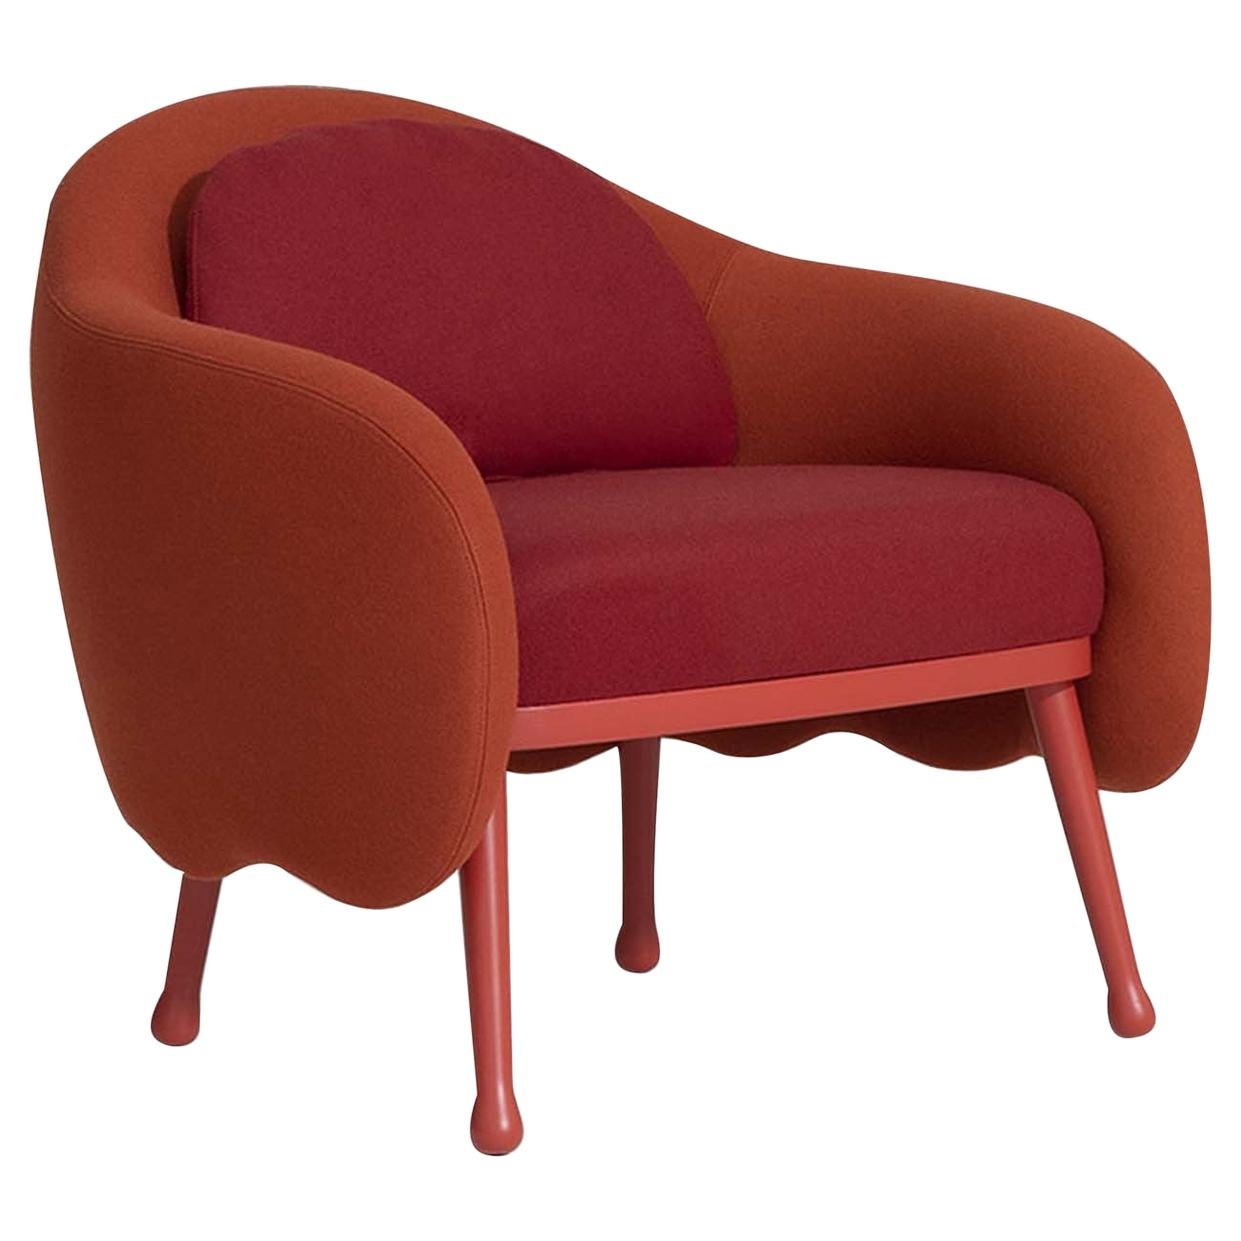 Corolla 271 Red and Orange Armchair by Cristina Celestino For Sale